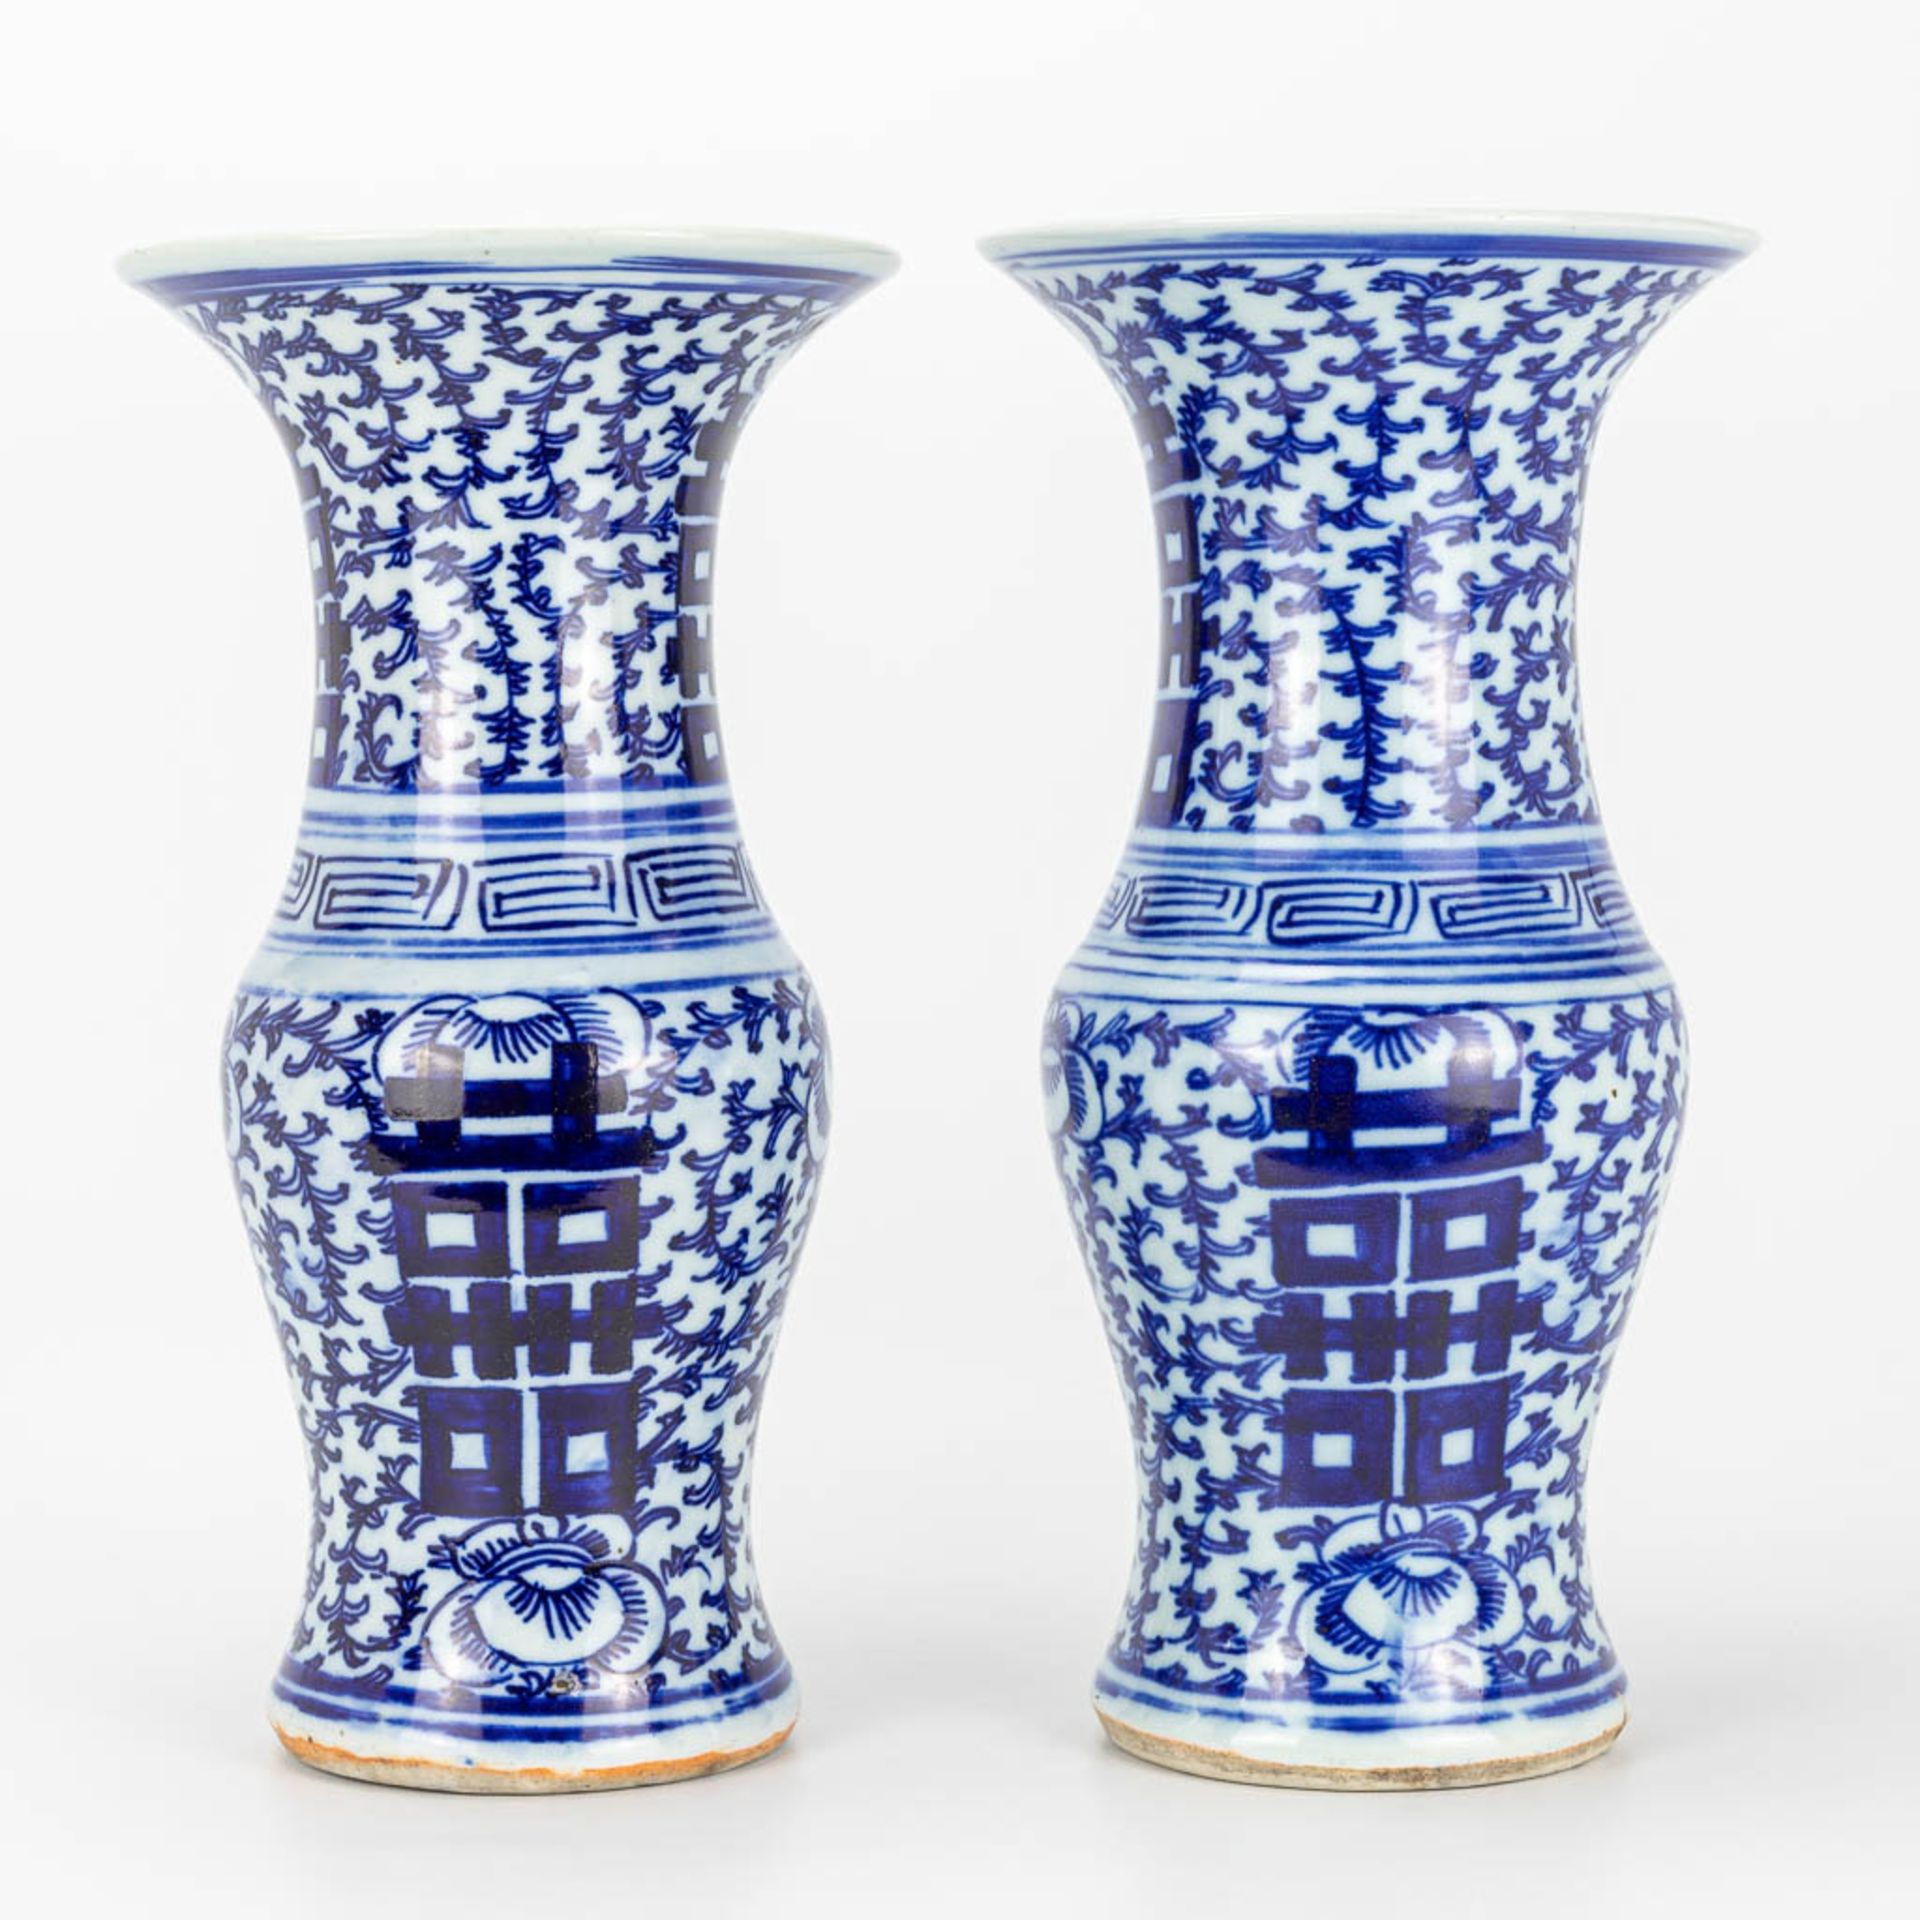 A pair of vases made of Chinese blue-white porcelain with 'Double Xi-sign' symbols of happiness. - Image 10 of 13